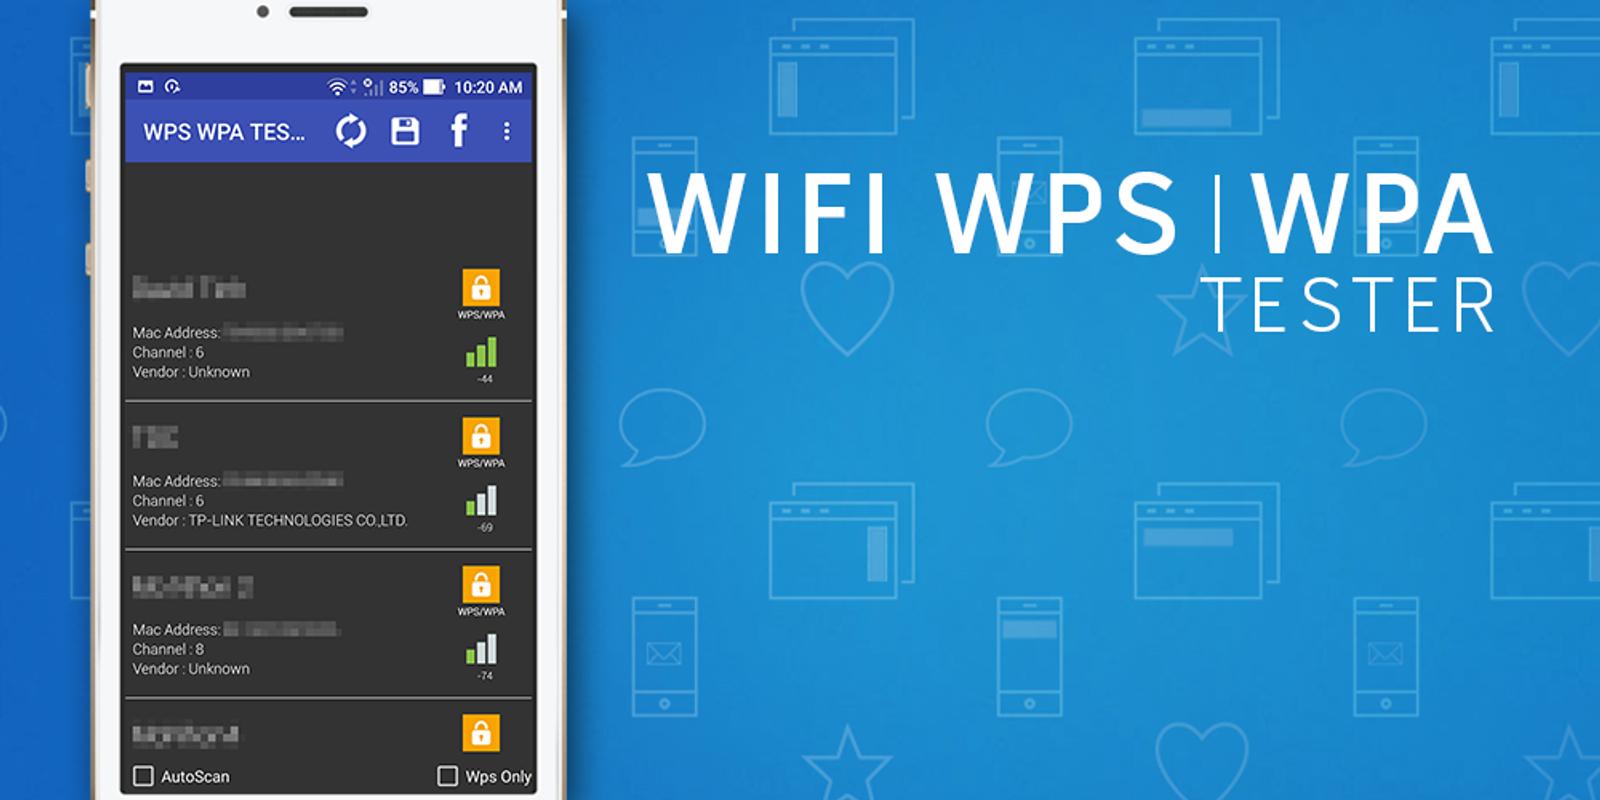 Apps test android. Android WPS. Tester. WPS. Wi Fi Tester PC app.